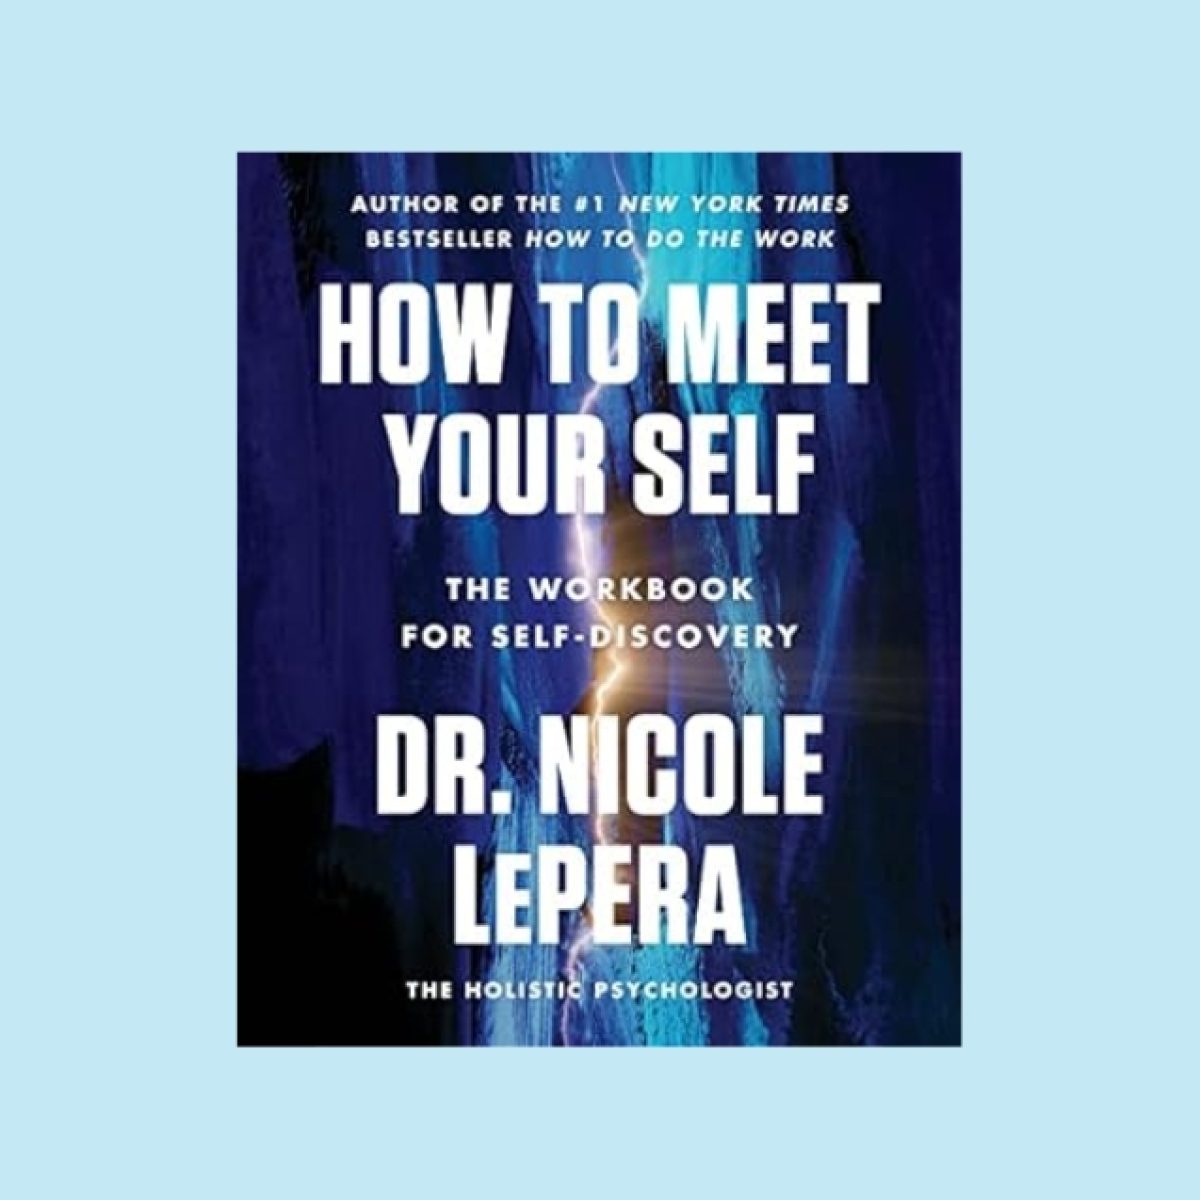 How to Meet Your Self